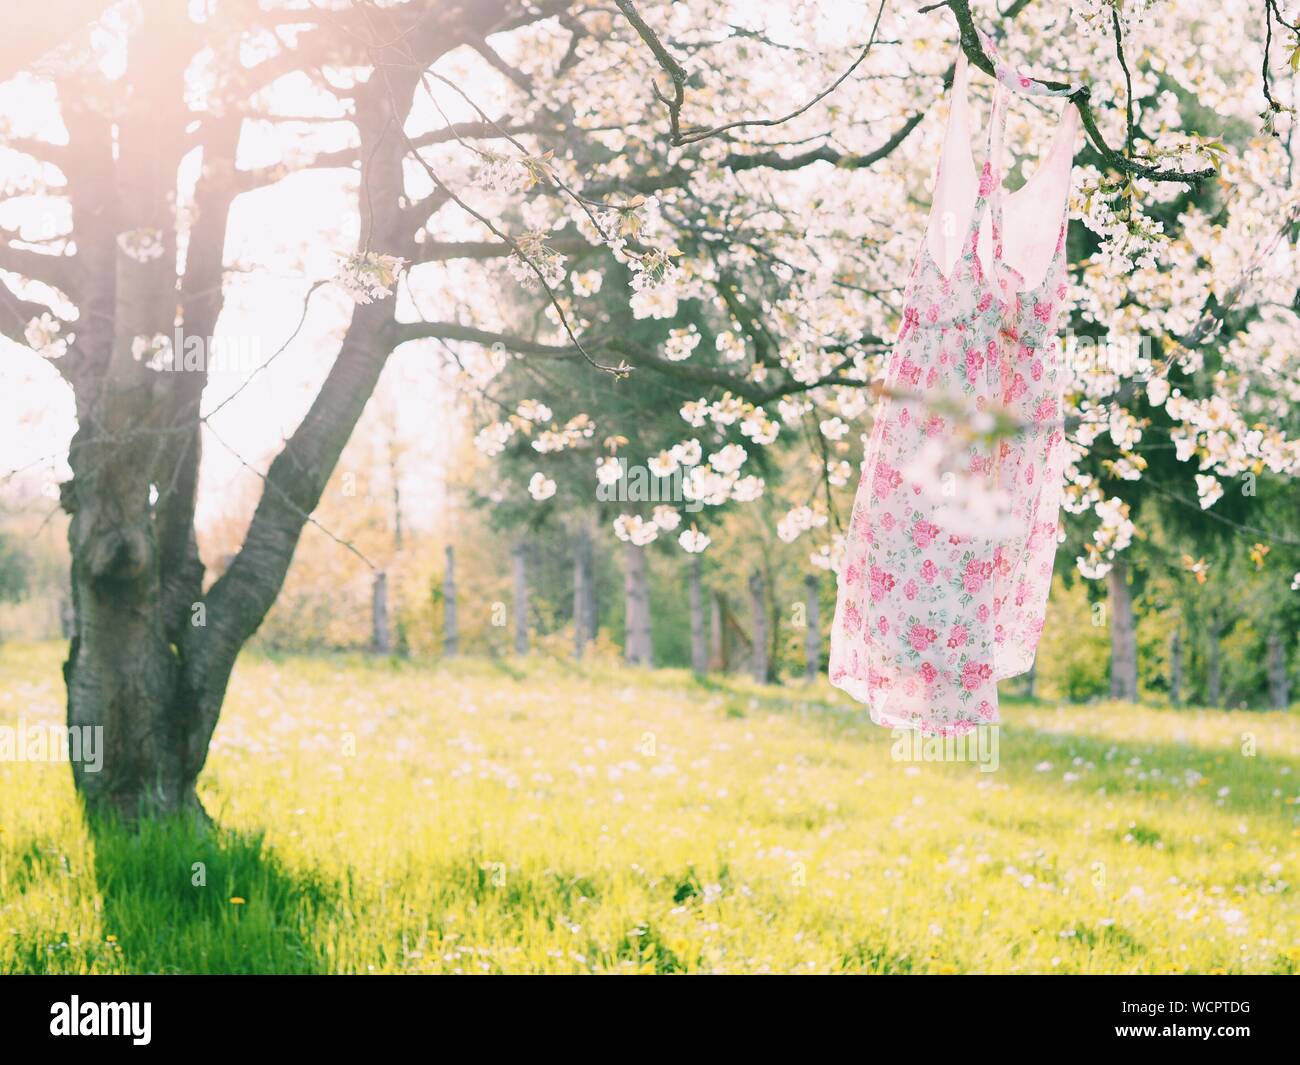 Floral Dress Hanging On Tree Stock Photo